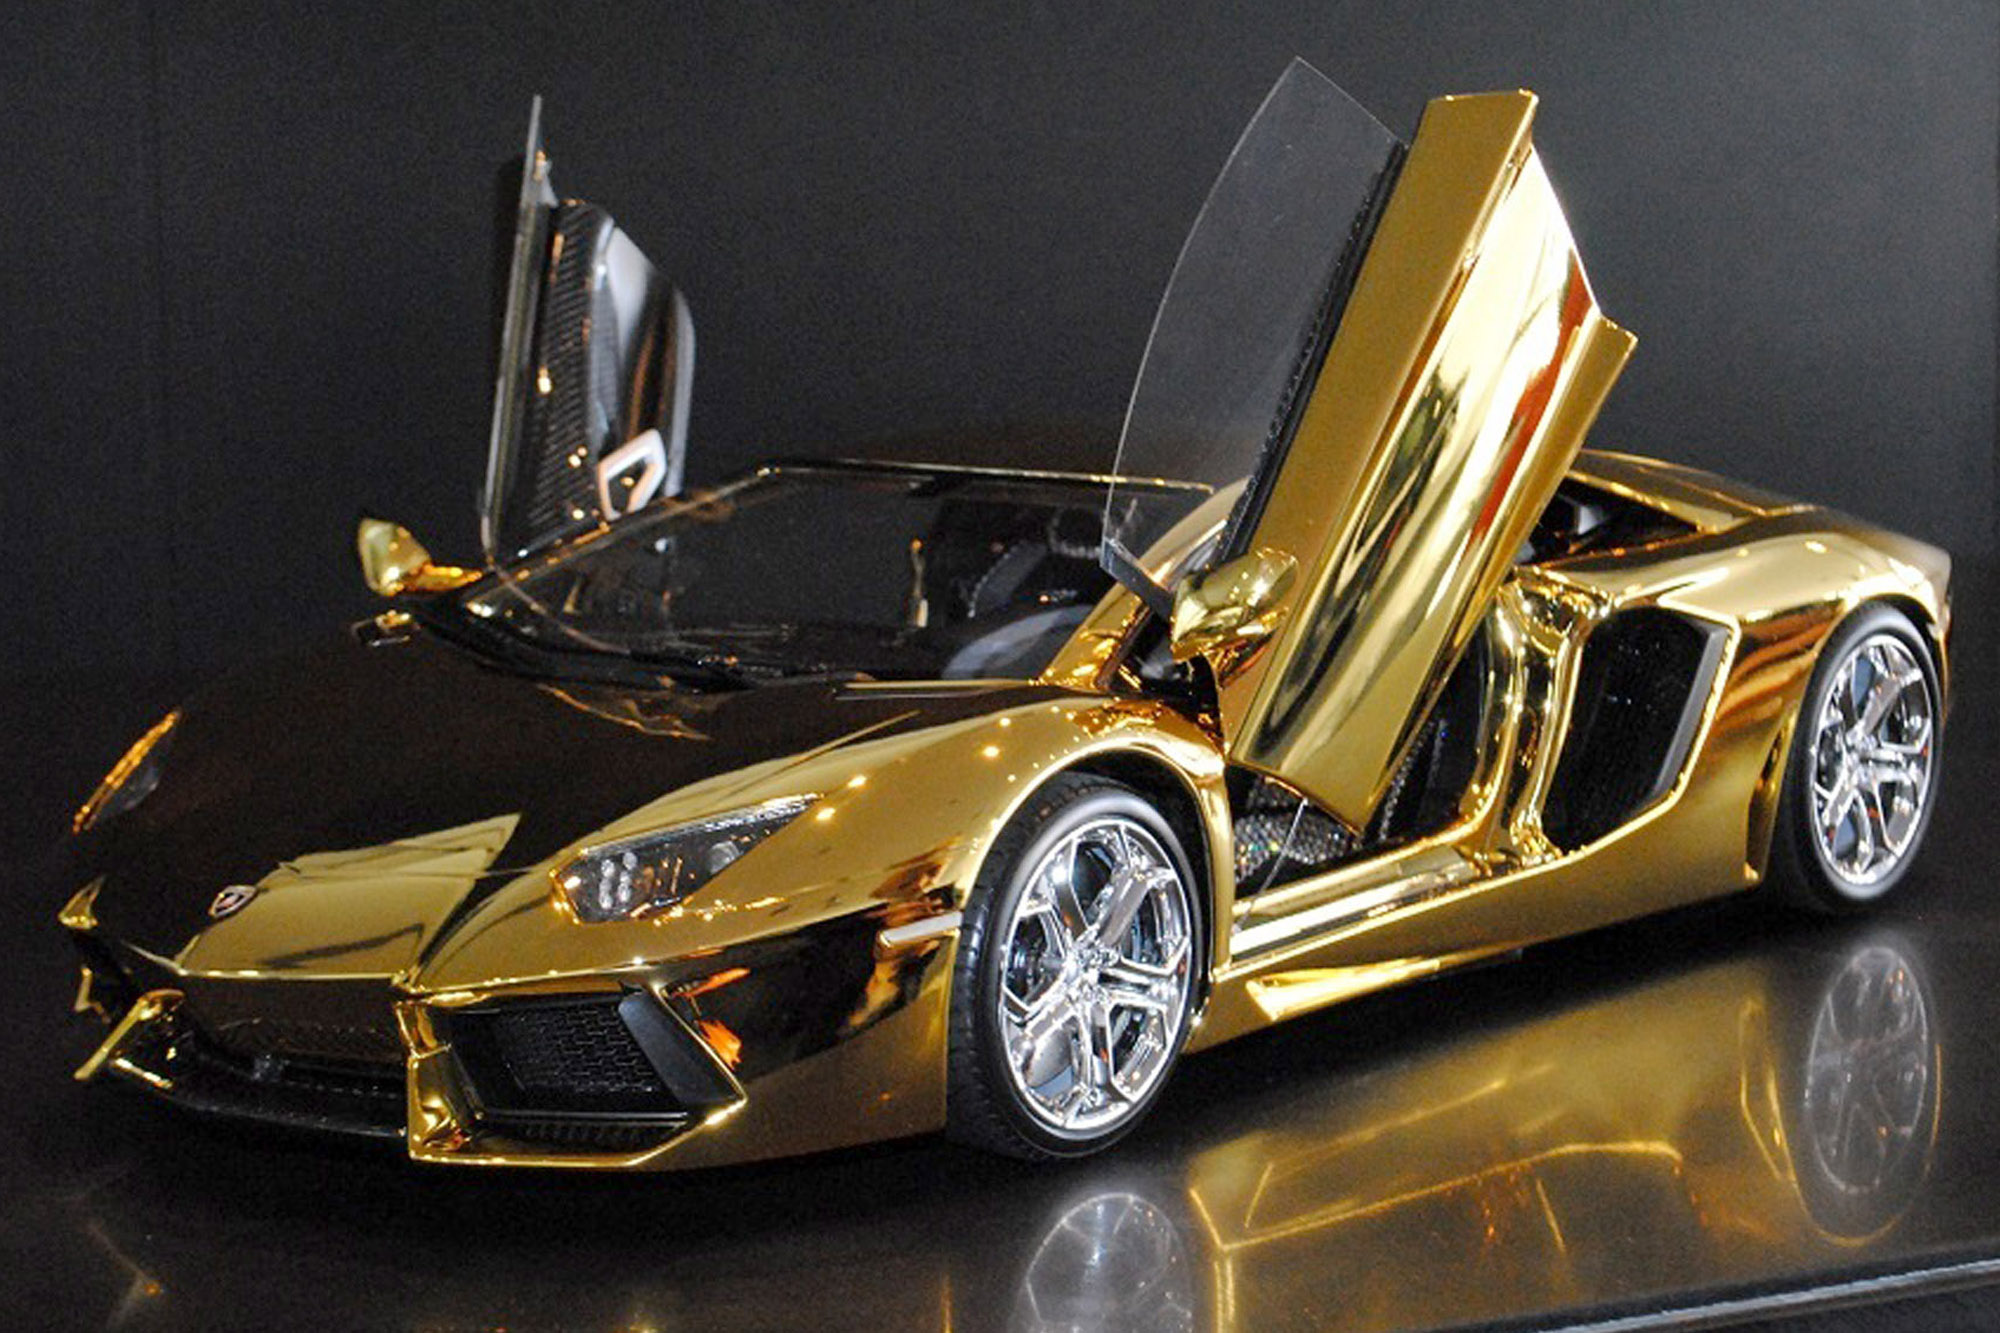 Solid Gold Lambhini And Other Supercars New York Post